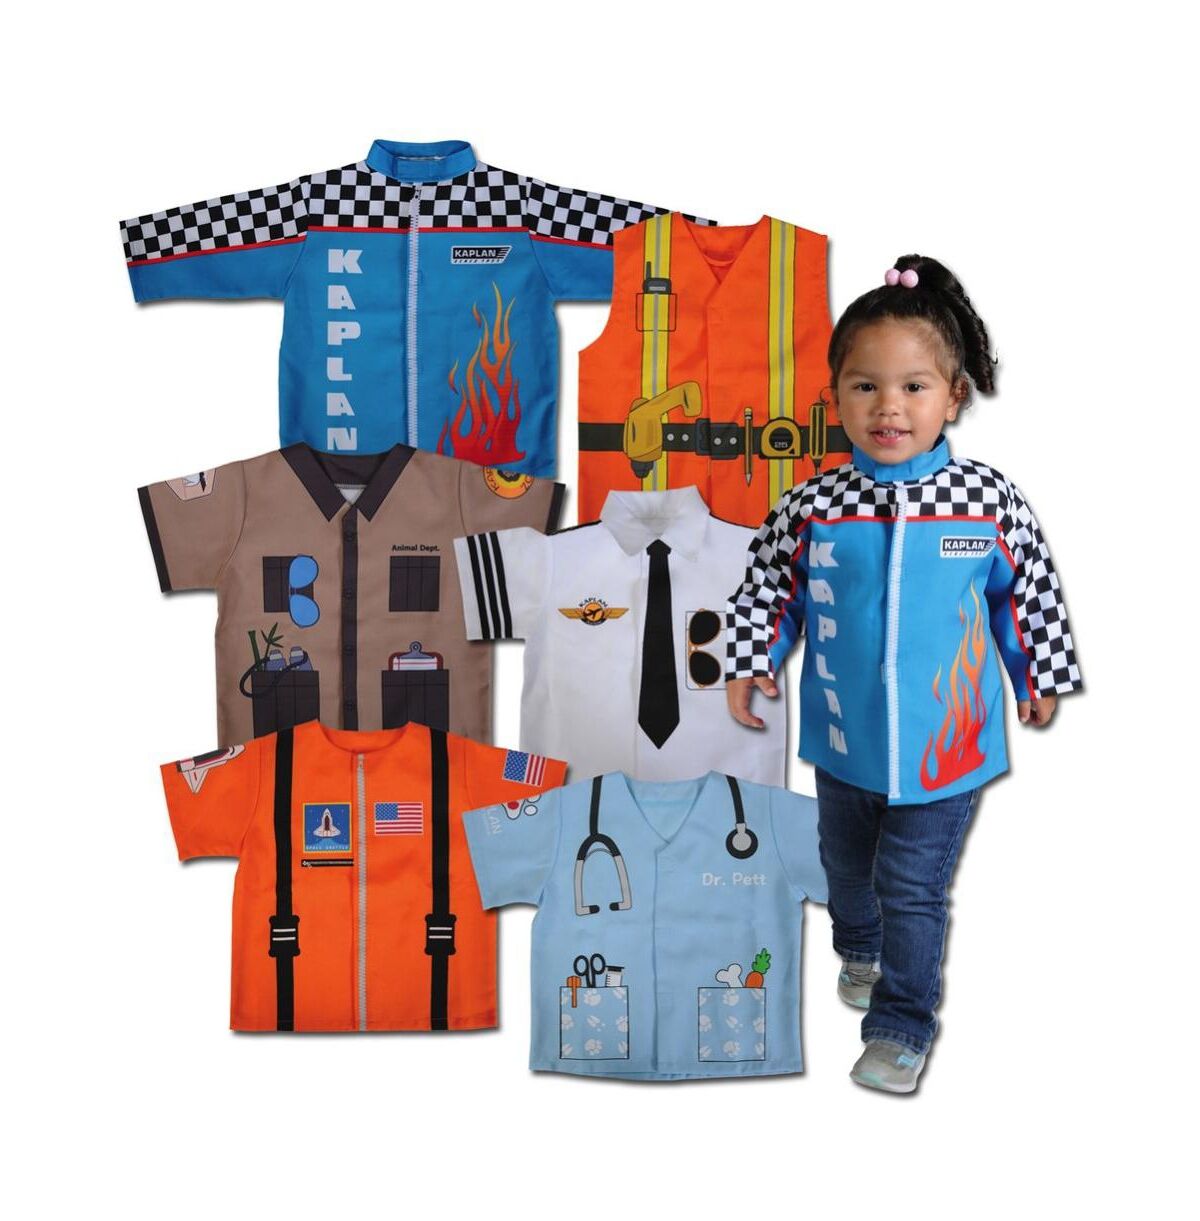 Kaplan Early Learning When I Grow Up Career Toddler Clothes - Set of 6 - Assorted pre-pack